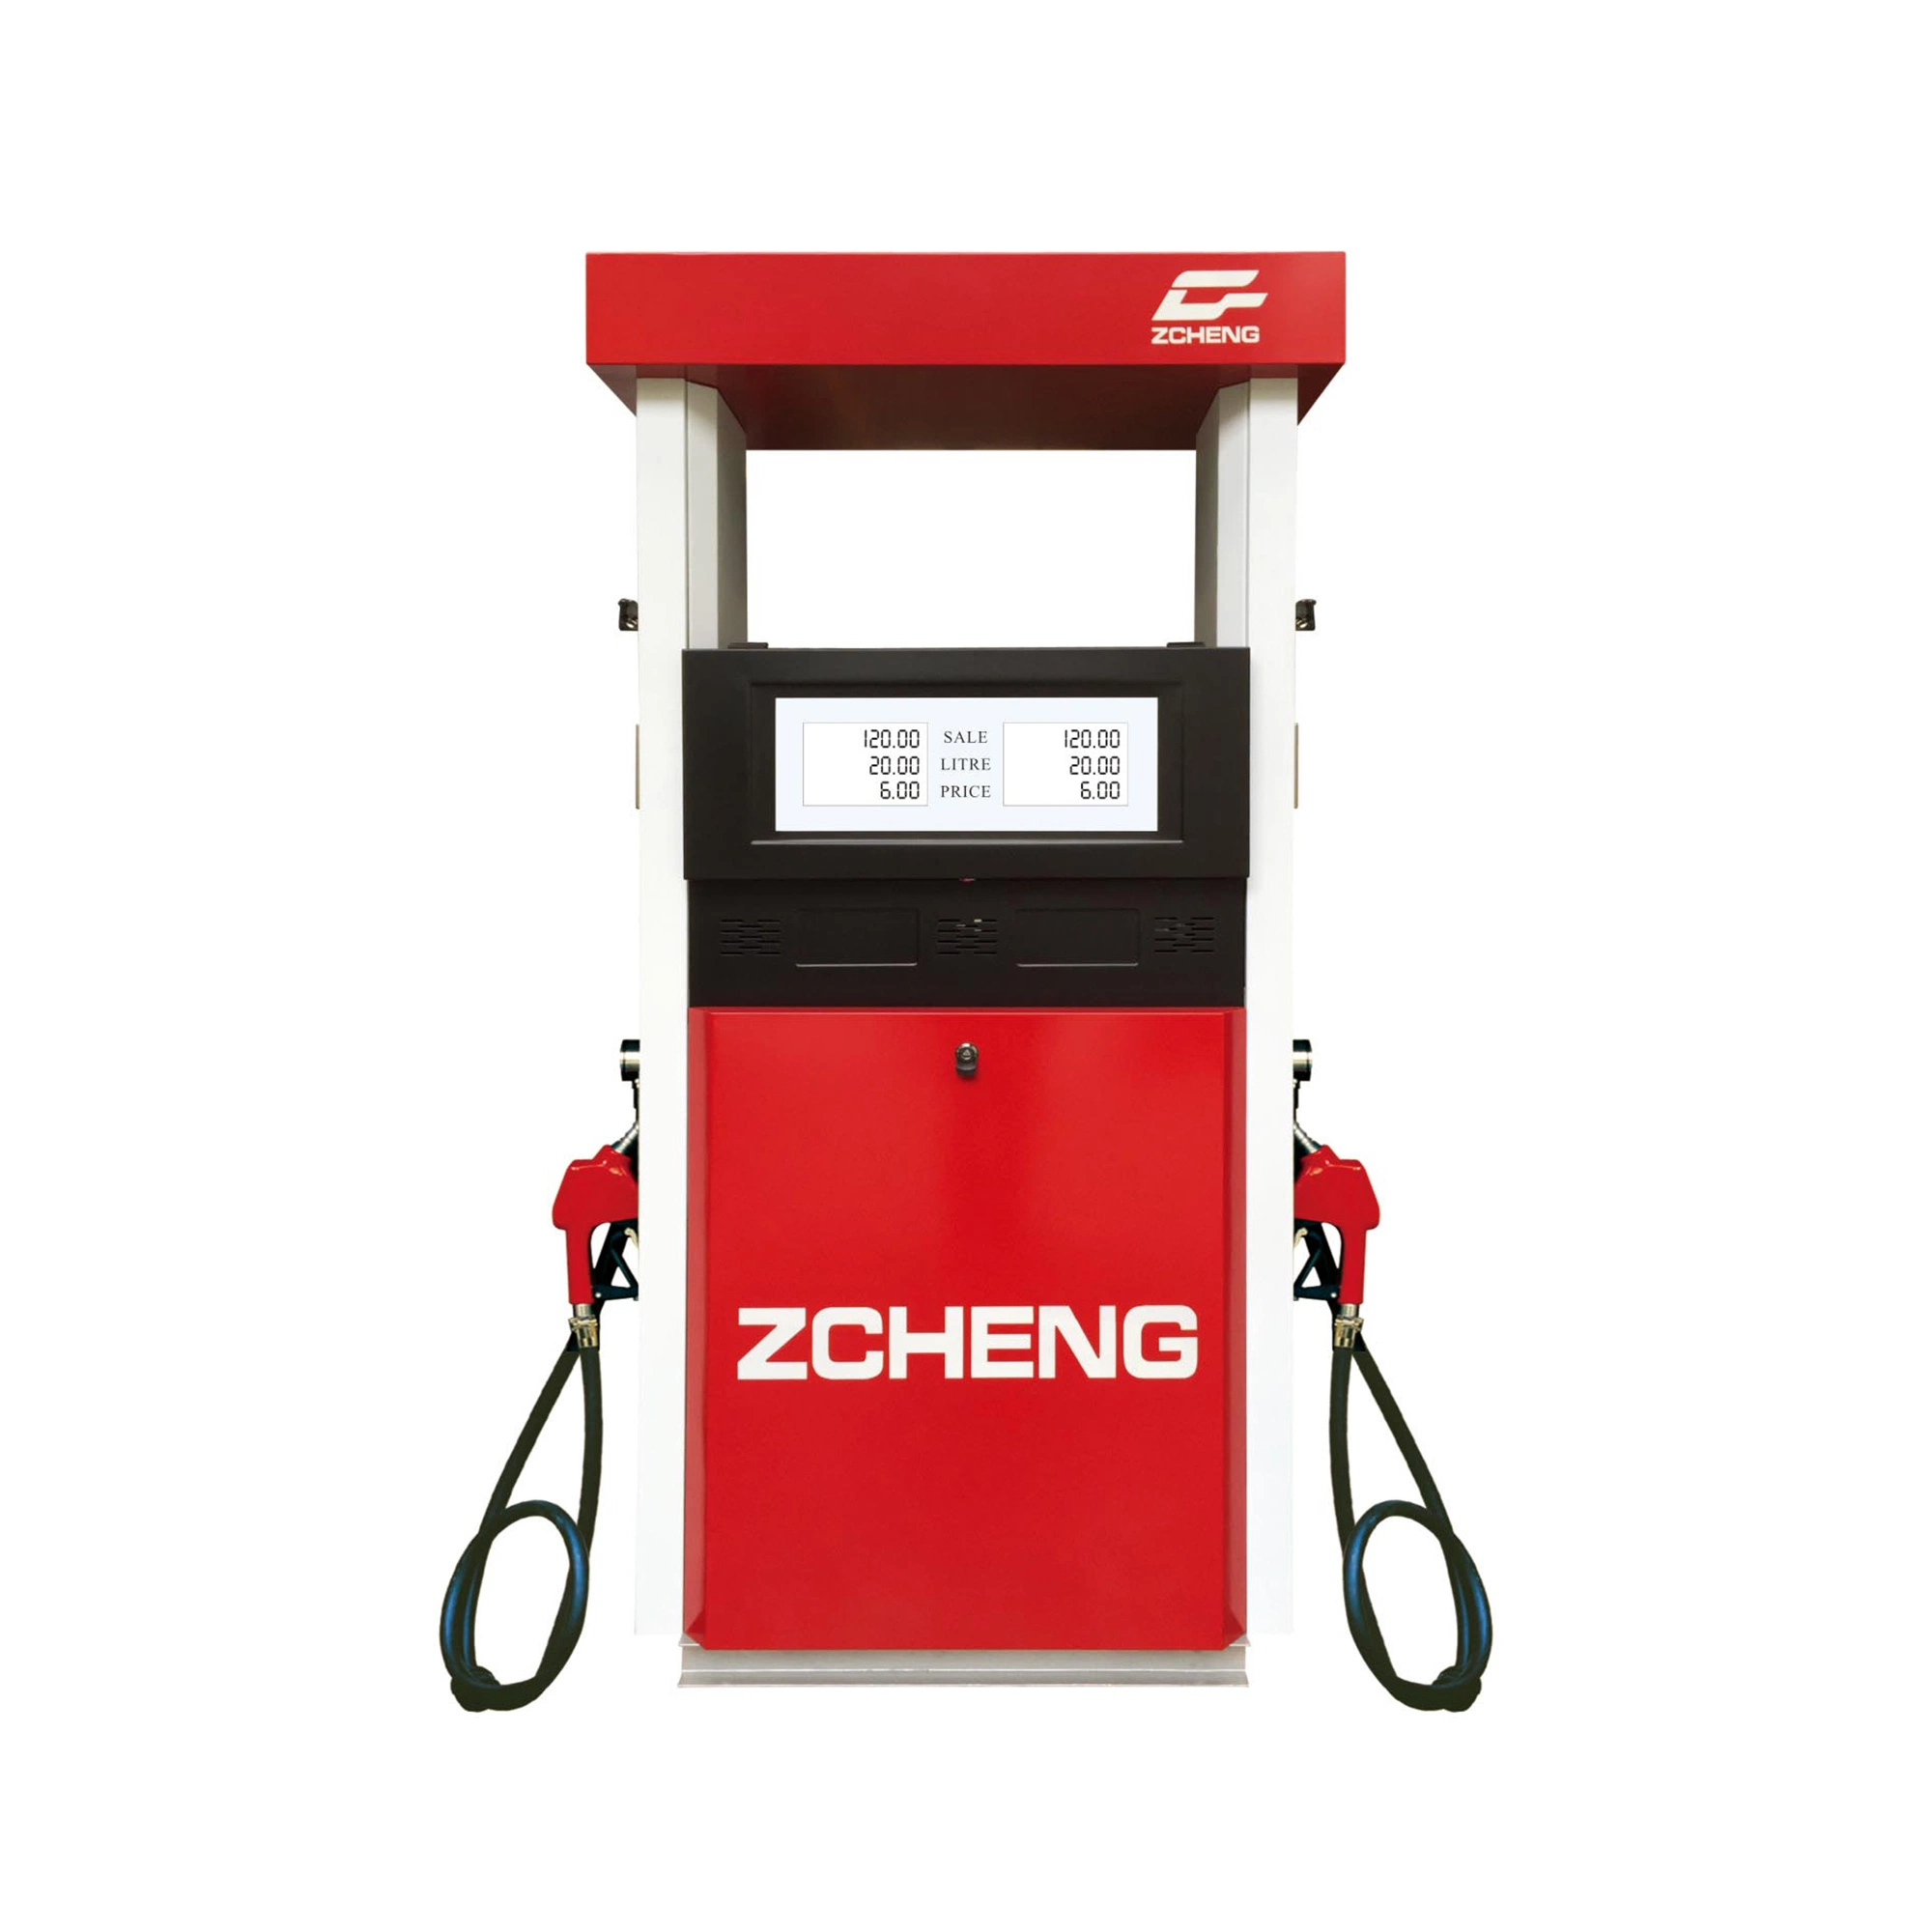 Zcheng Automatic Fuel Dispenser for Gas Filling Station